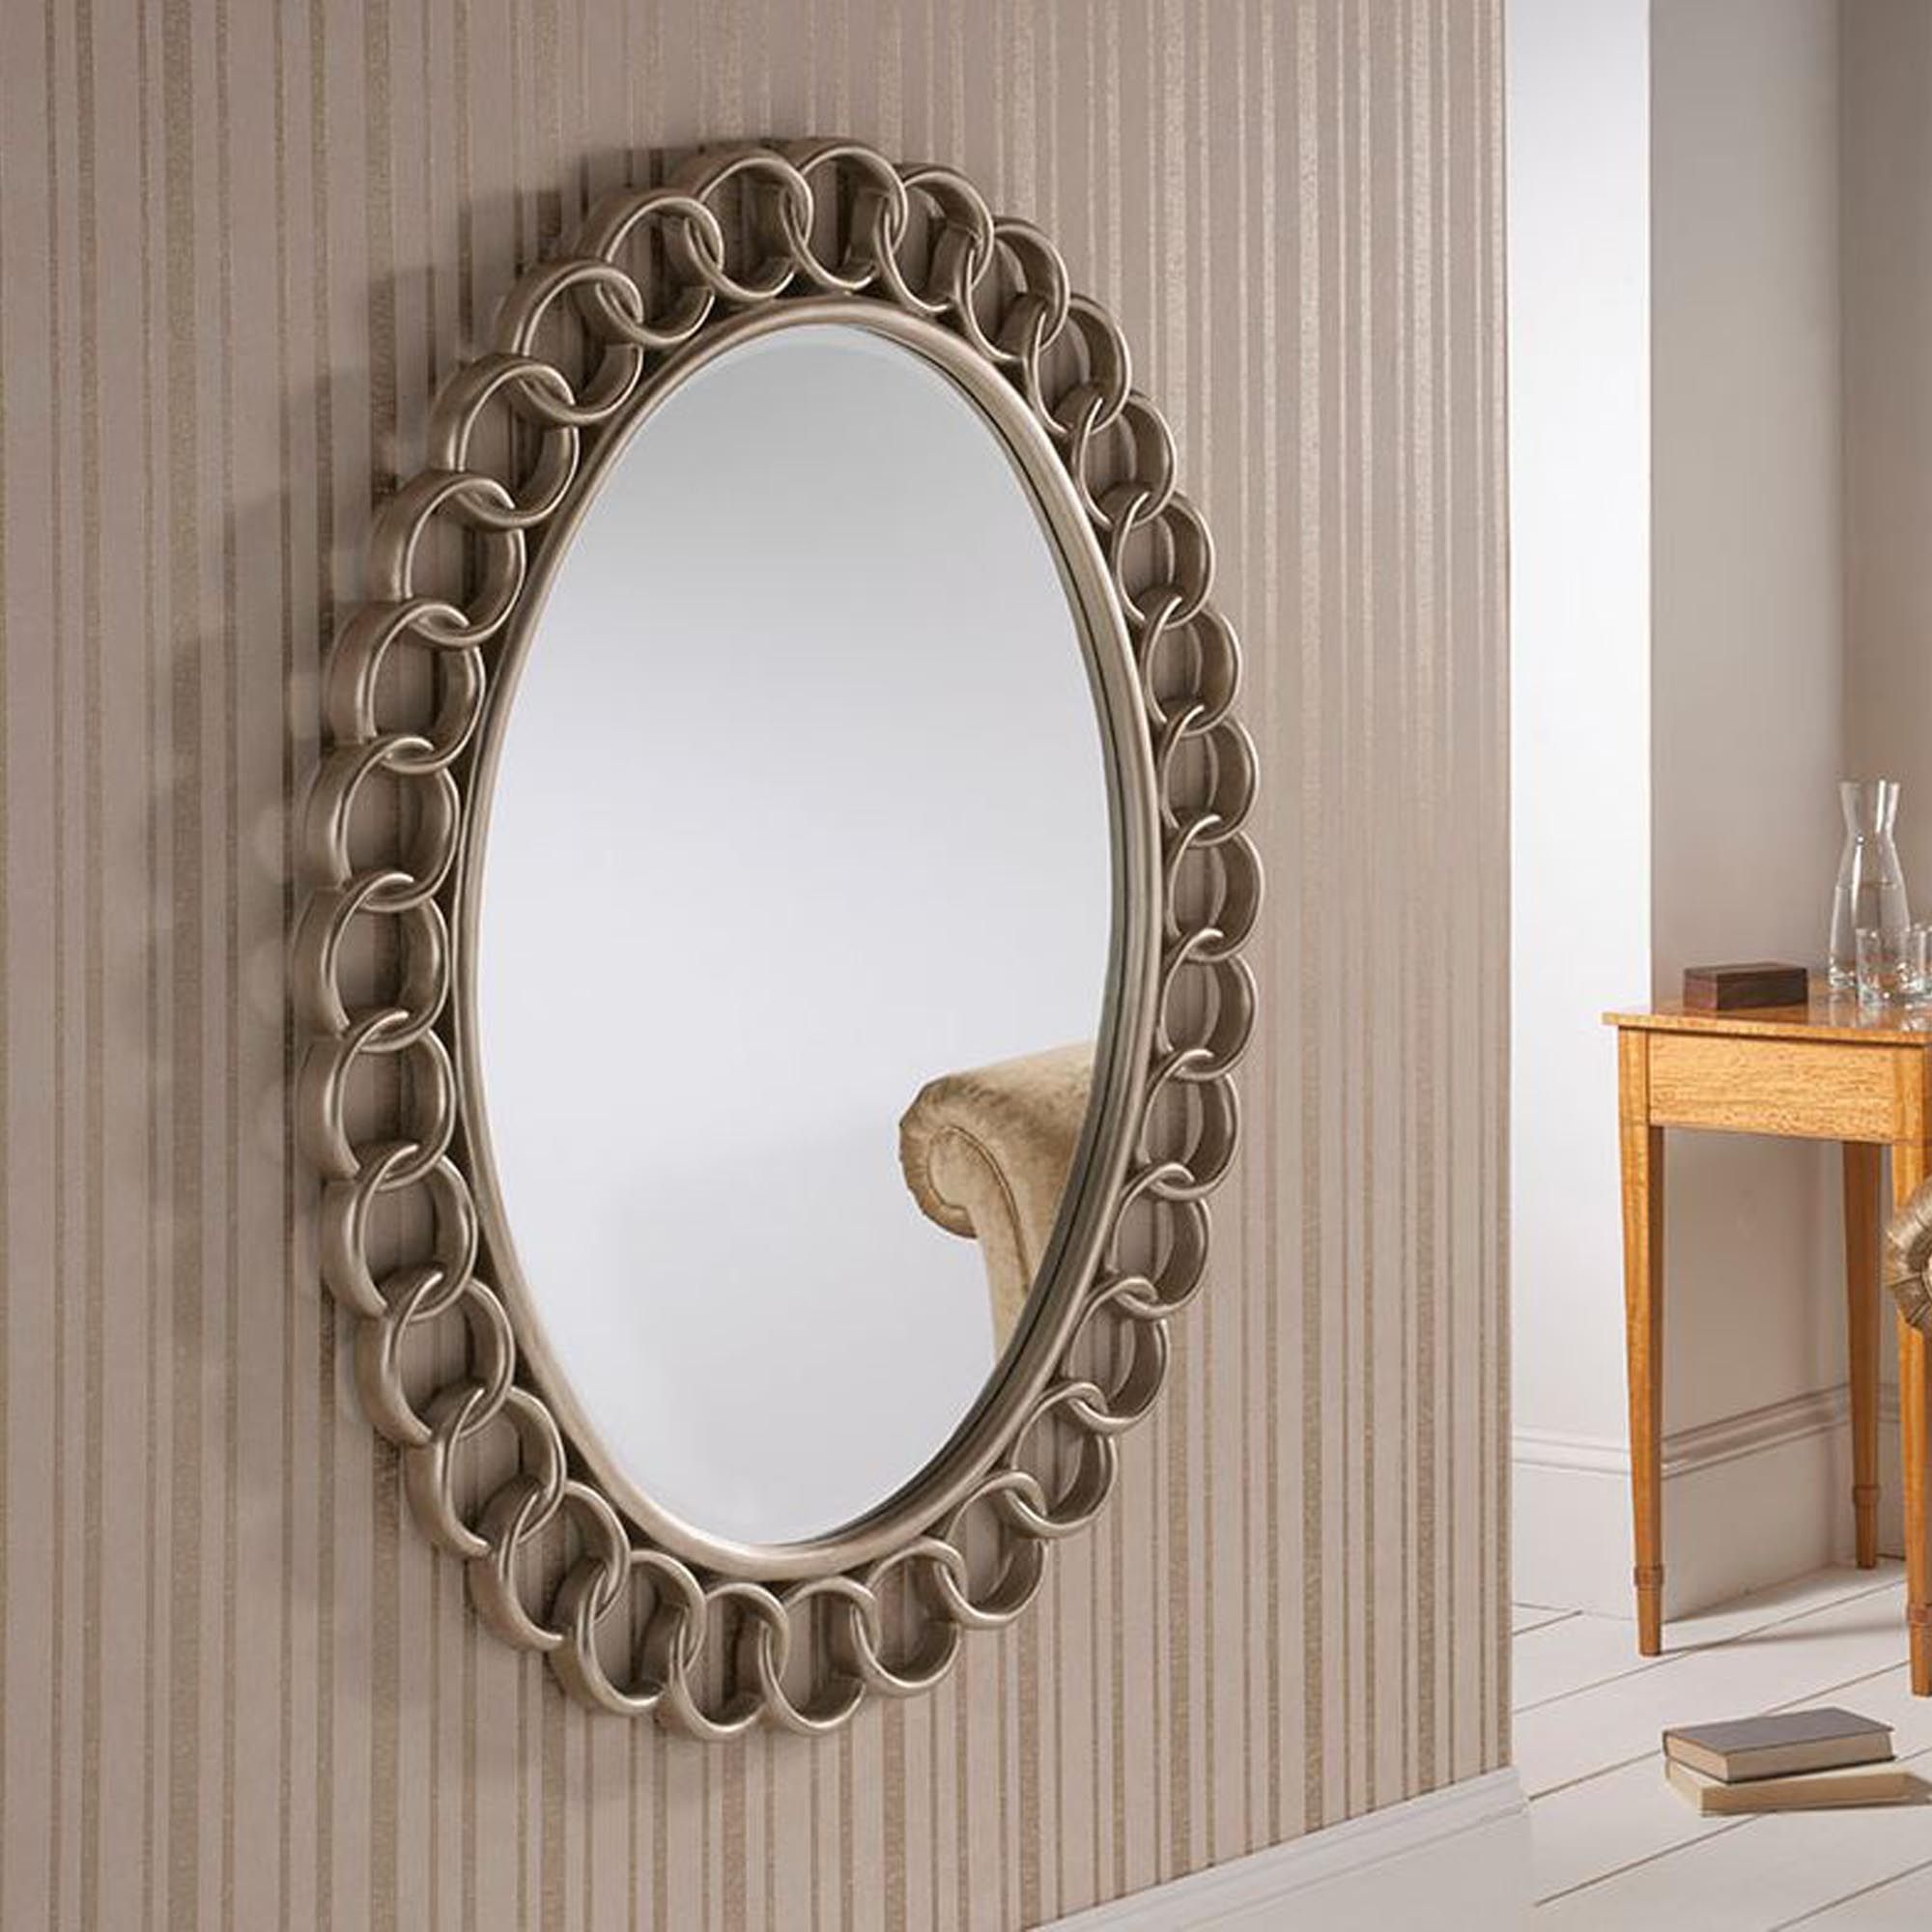 Loop Link Contemporary Silver Wall Mirror | Homesdirect365 For Wall Mirrors (View 10 of 15)